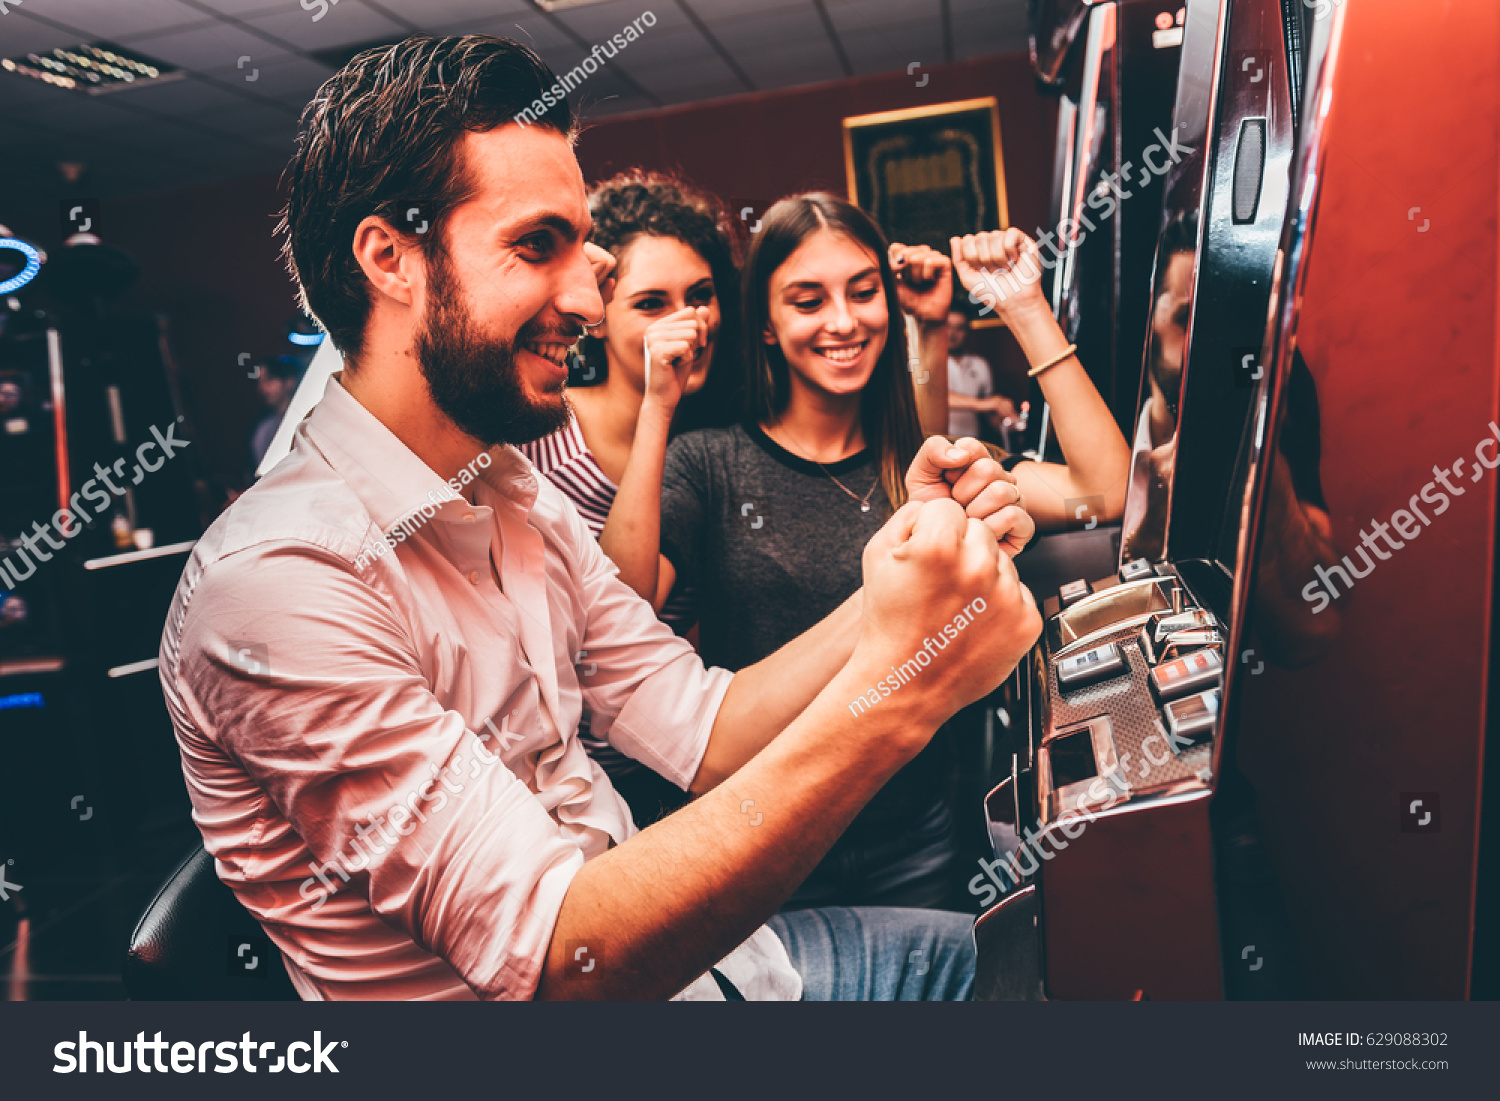 Group of friends playing slot machines #629088302